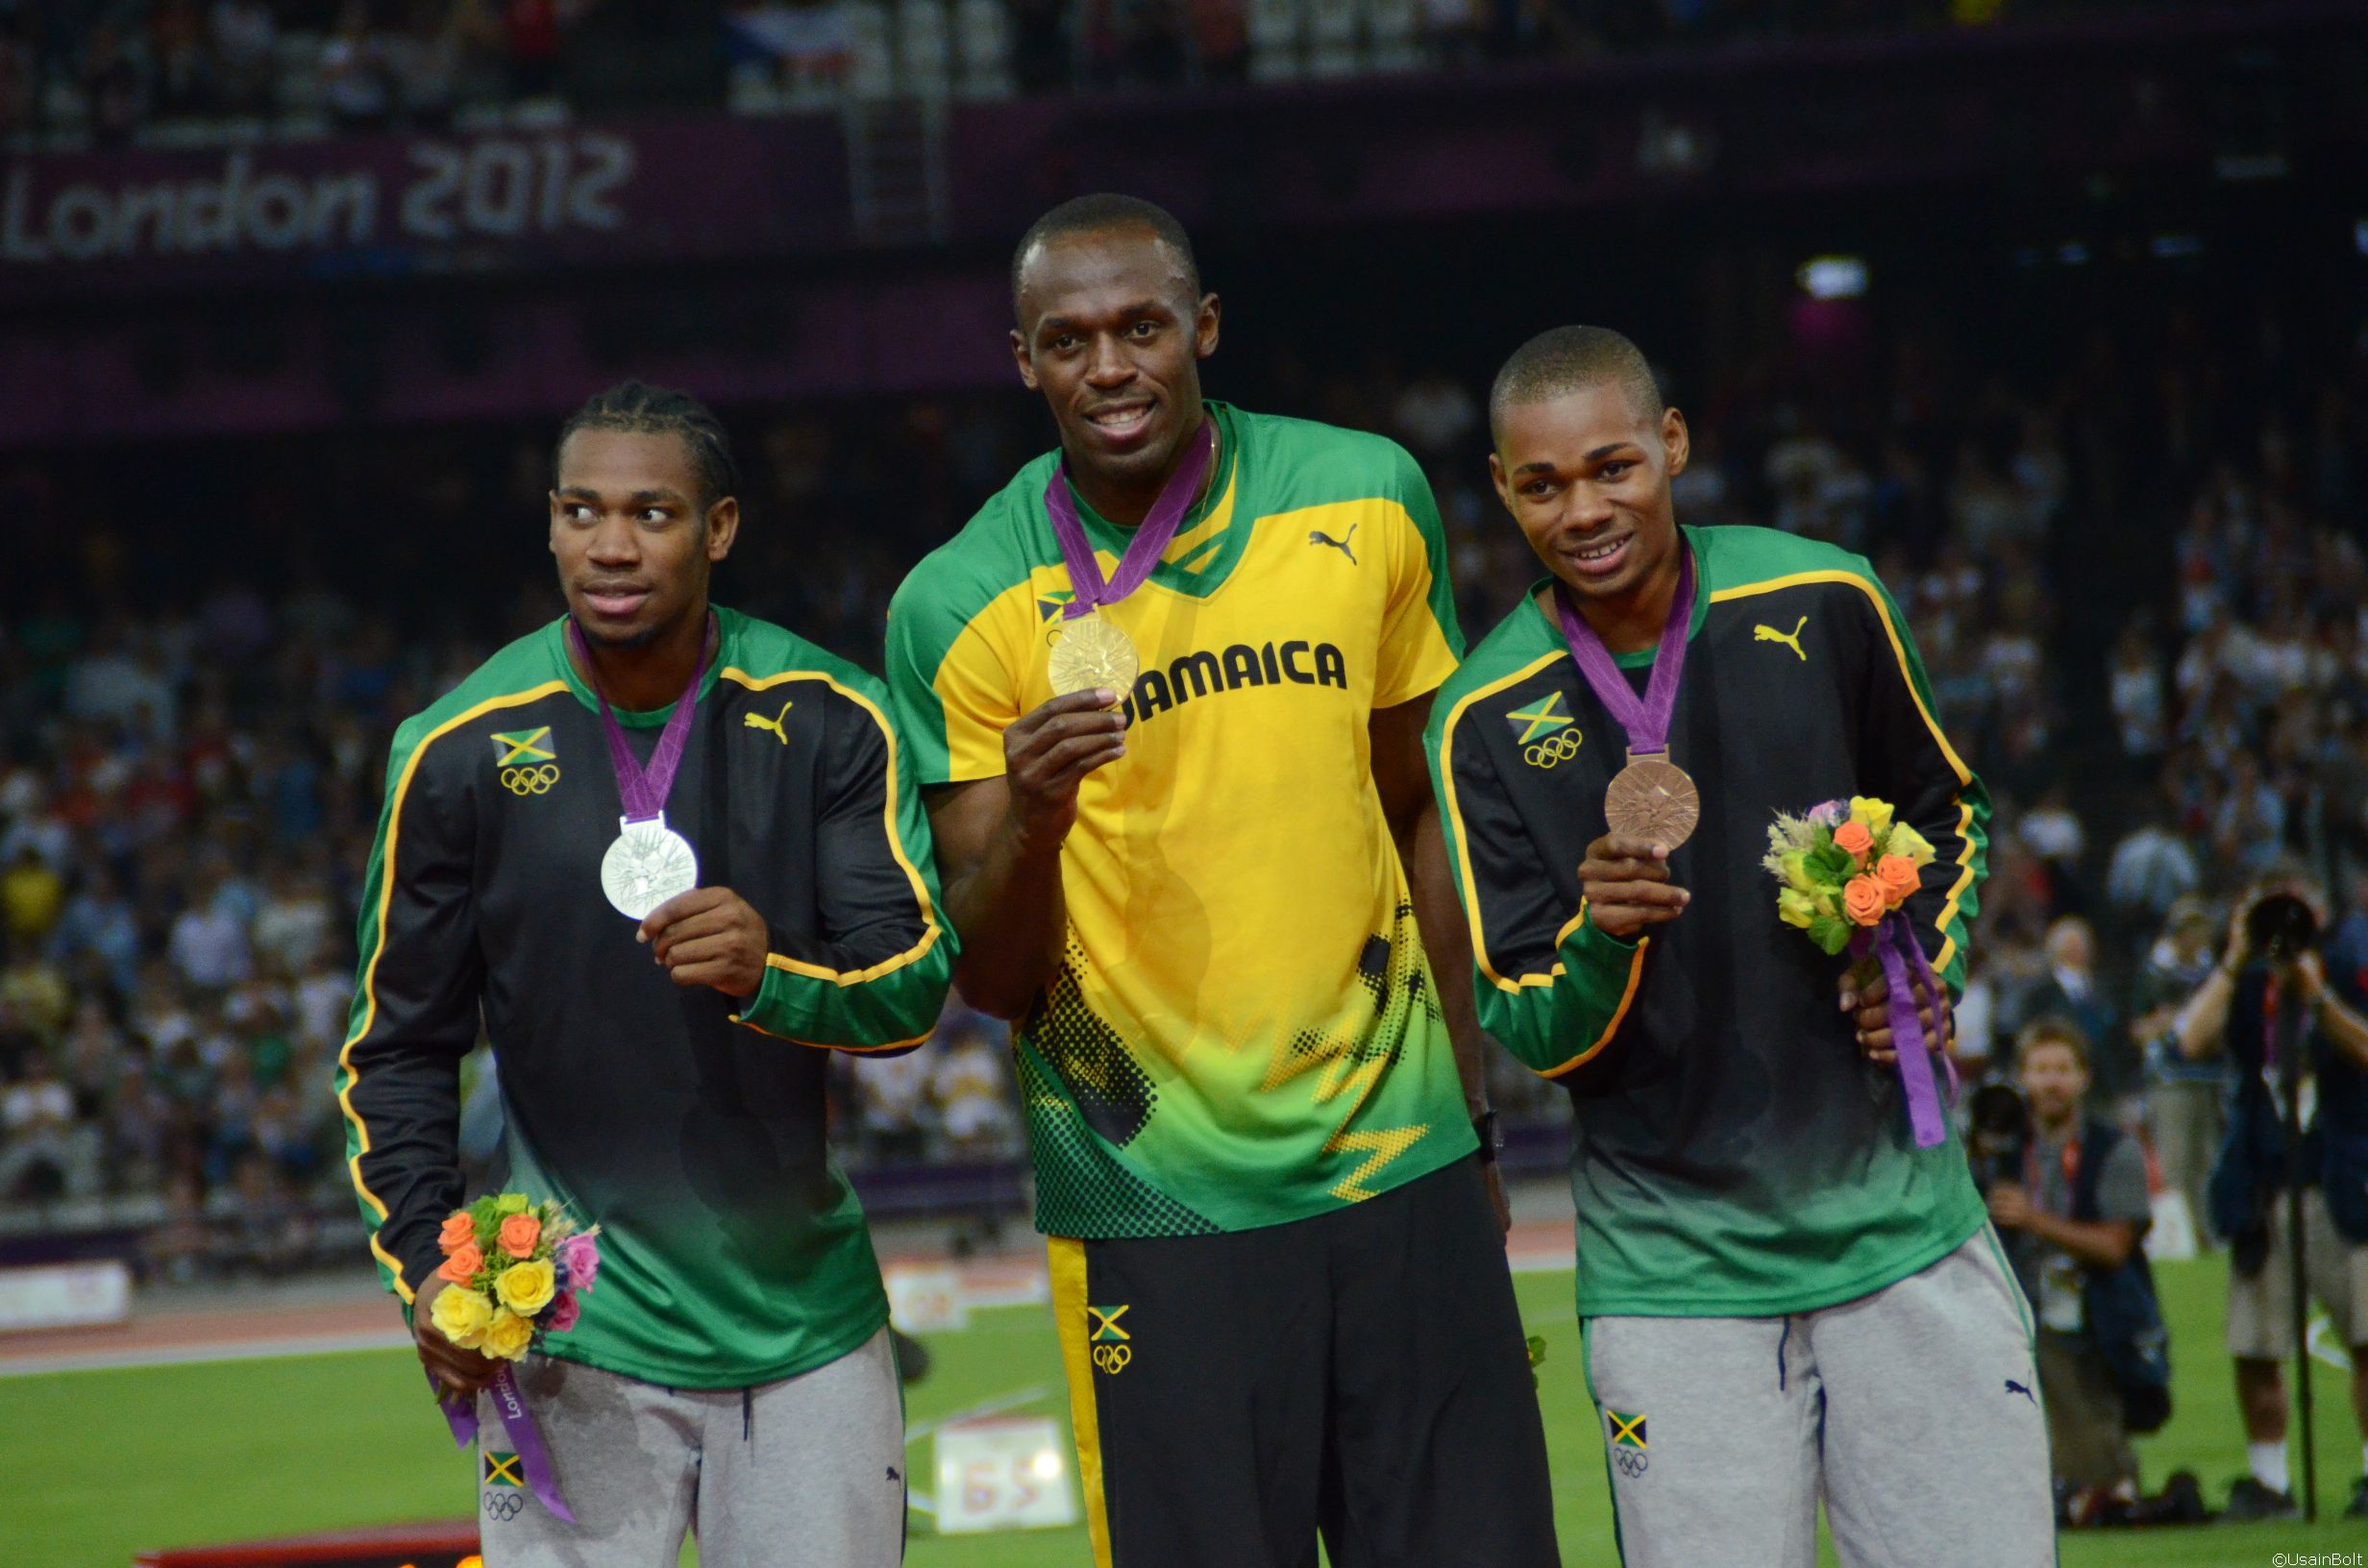 Bolt leads Jamaica’s sweep of the Olympic Games 200 metres